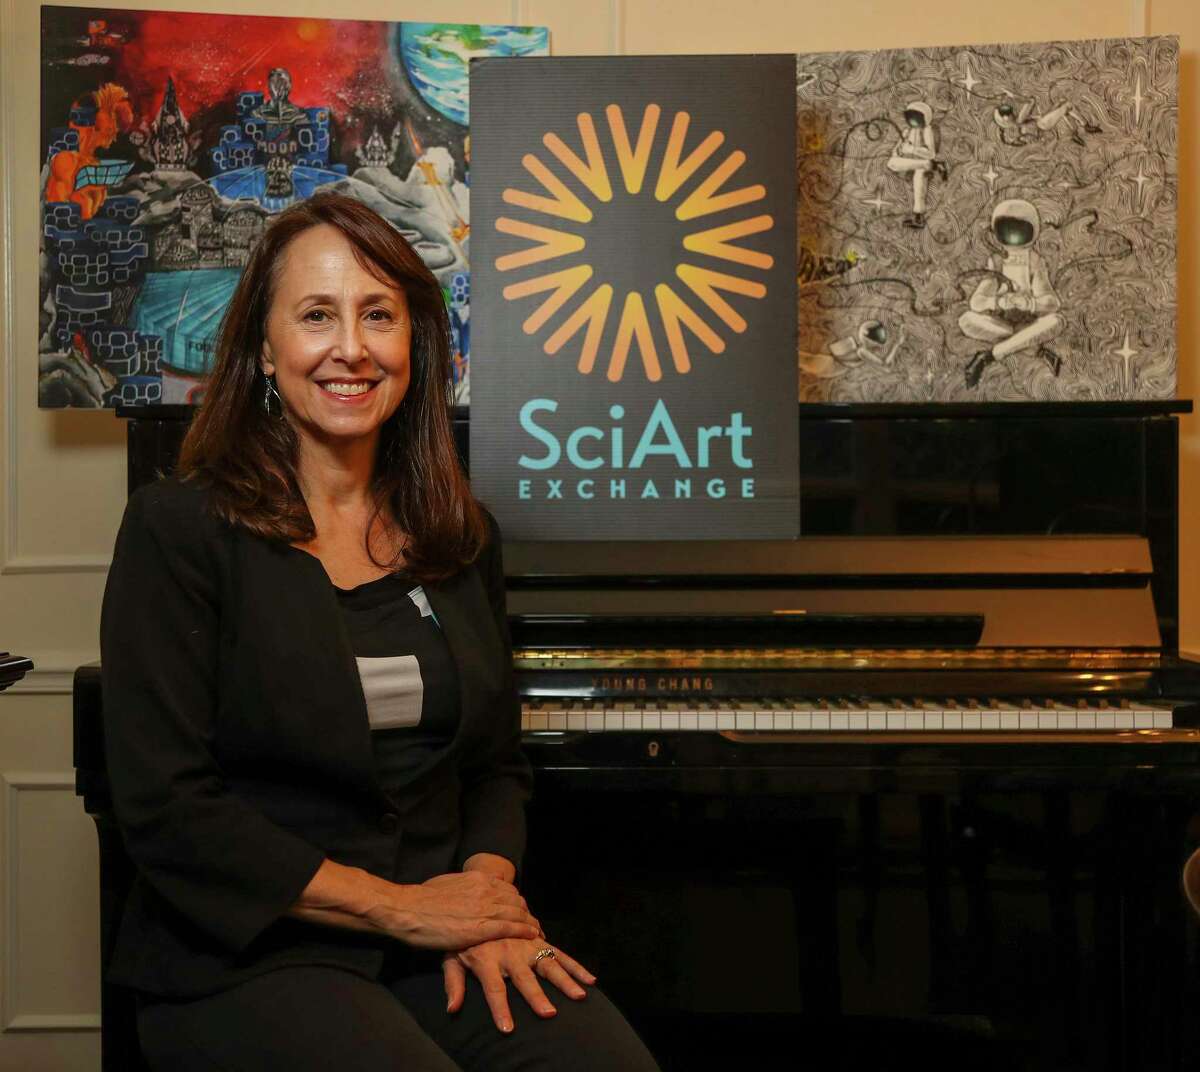 Jancy McPhee, the executive director of SciArt Exchange, with art pieces in her home office, Wednesday, Nov. 17, 2021 in Houston. SciArt Exchange is a Houston organization that offers contests and events to bring together the arts with space, science and technology. It received $1 million from Blue Origin’s foundation Club for the Future this year.